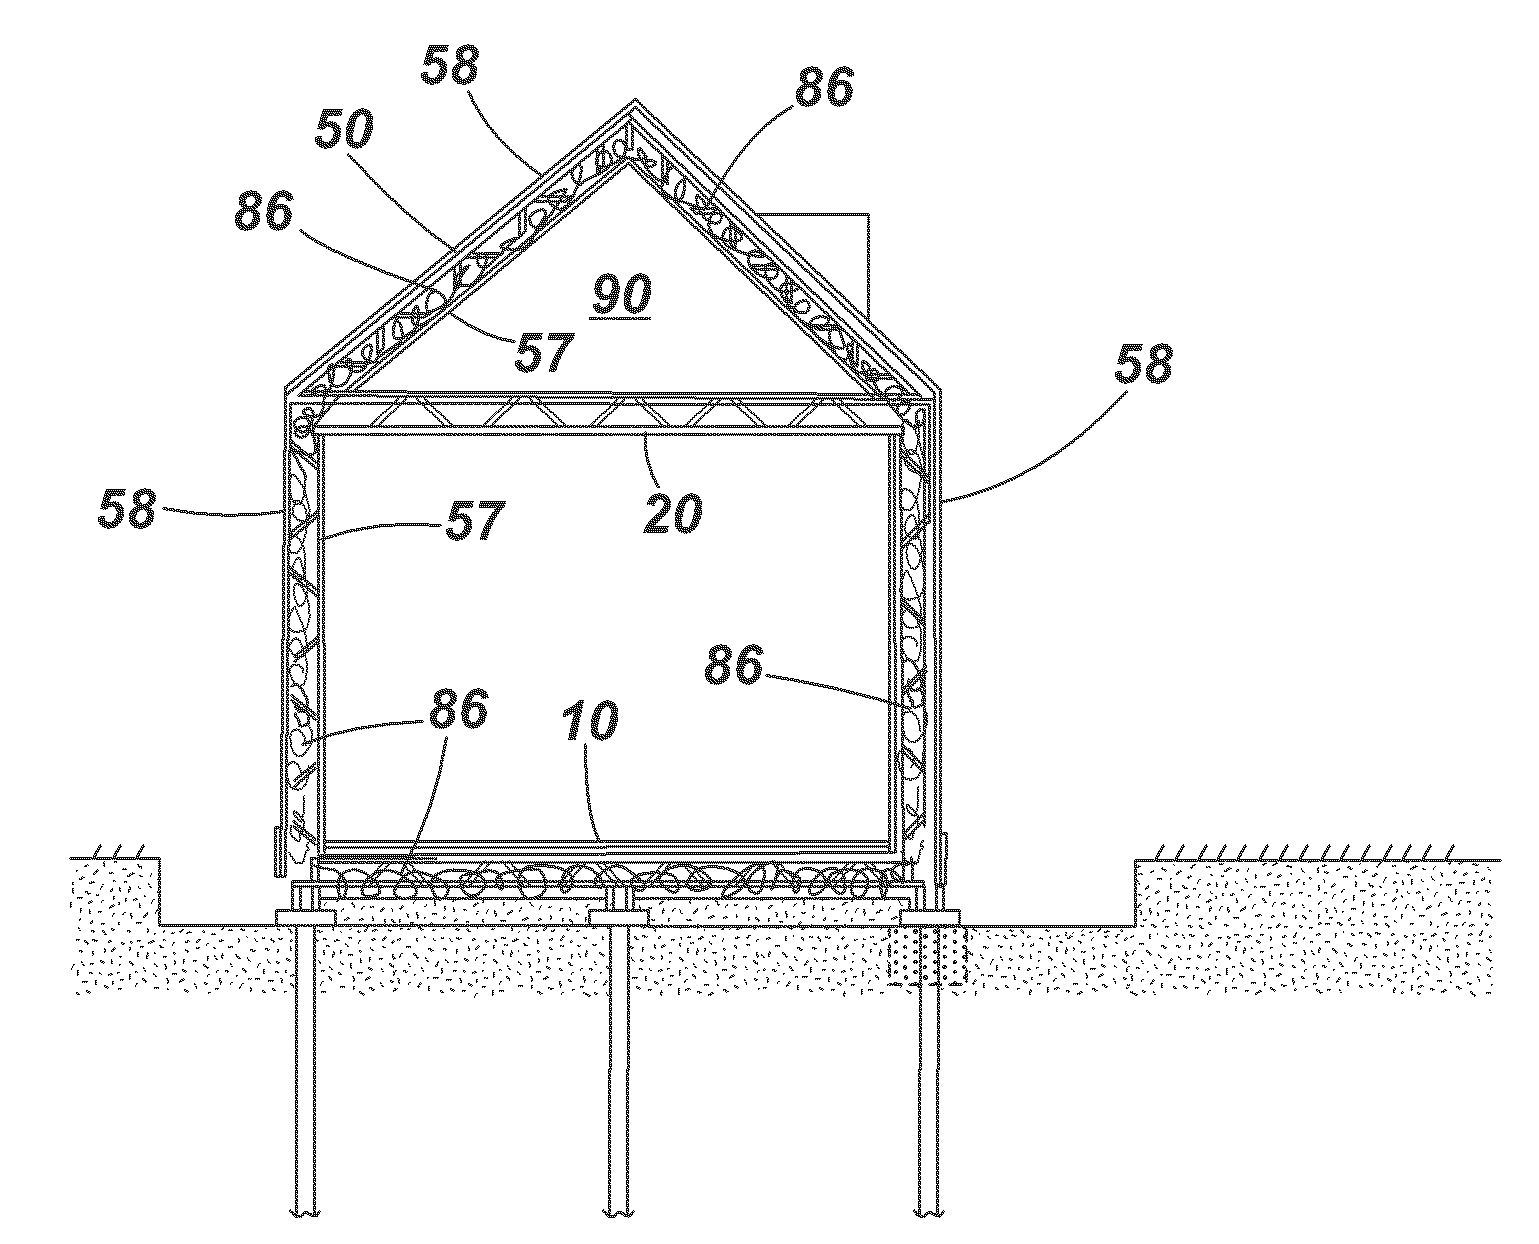 Building and method of constructing a building